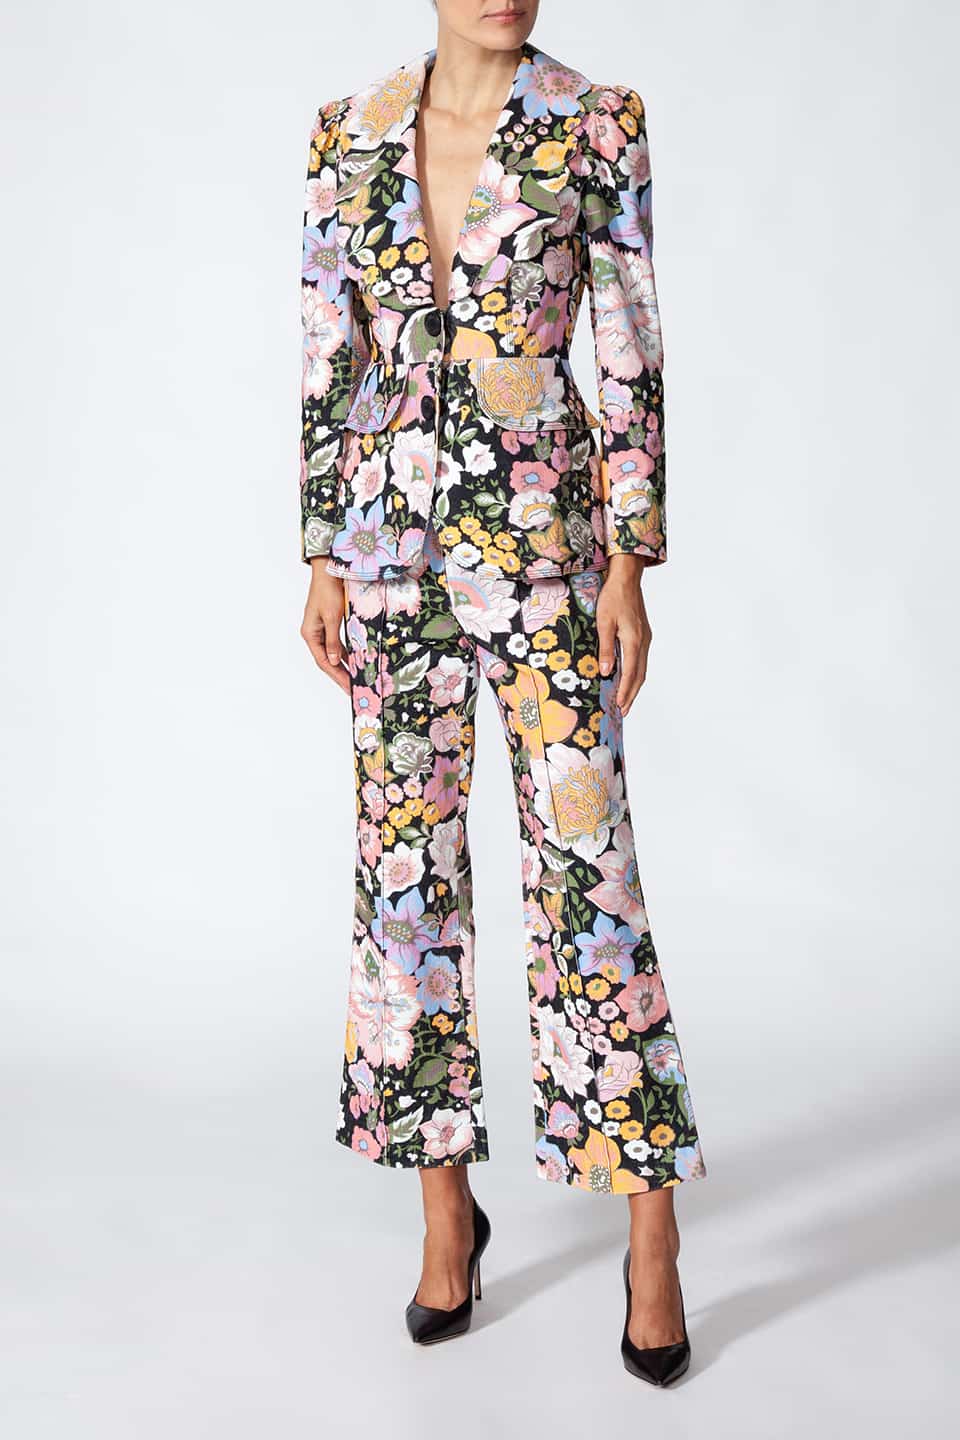 Thumbnail for Product gallery 7, Woman in full body pose, wearing waist fitted jacket in corduroy with floral print. Trendy jacket from European Stylist Manoush.